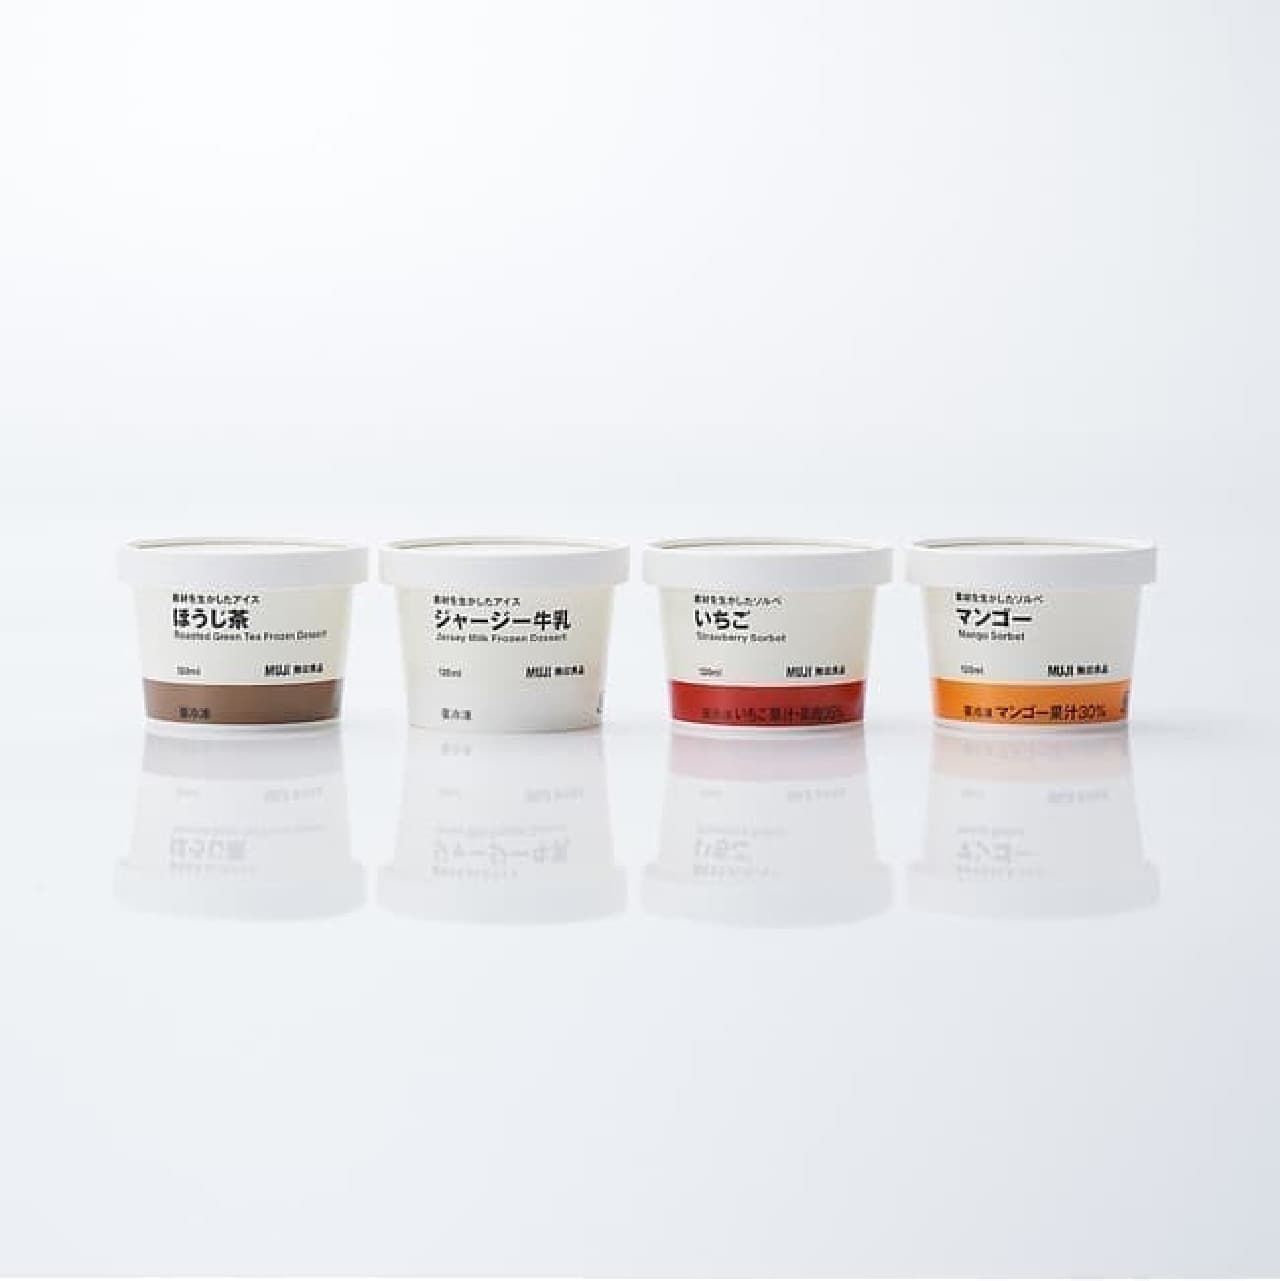 MUJI "Ice cream and sorbet with the best ingredients